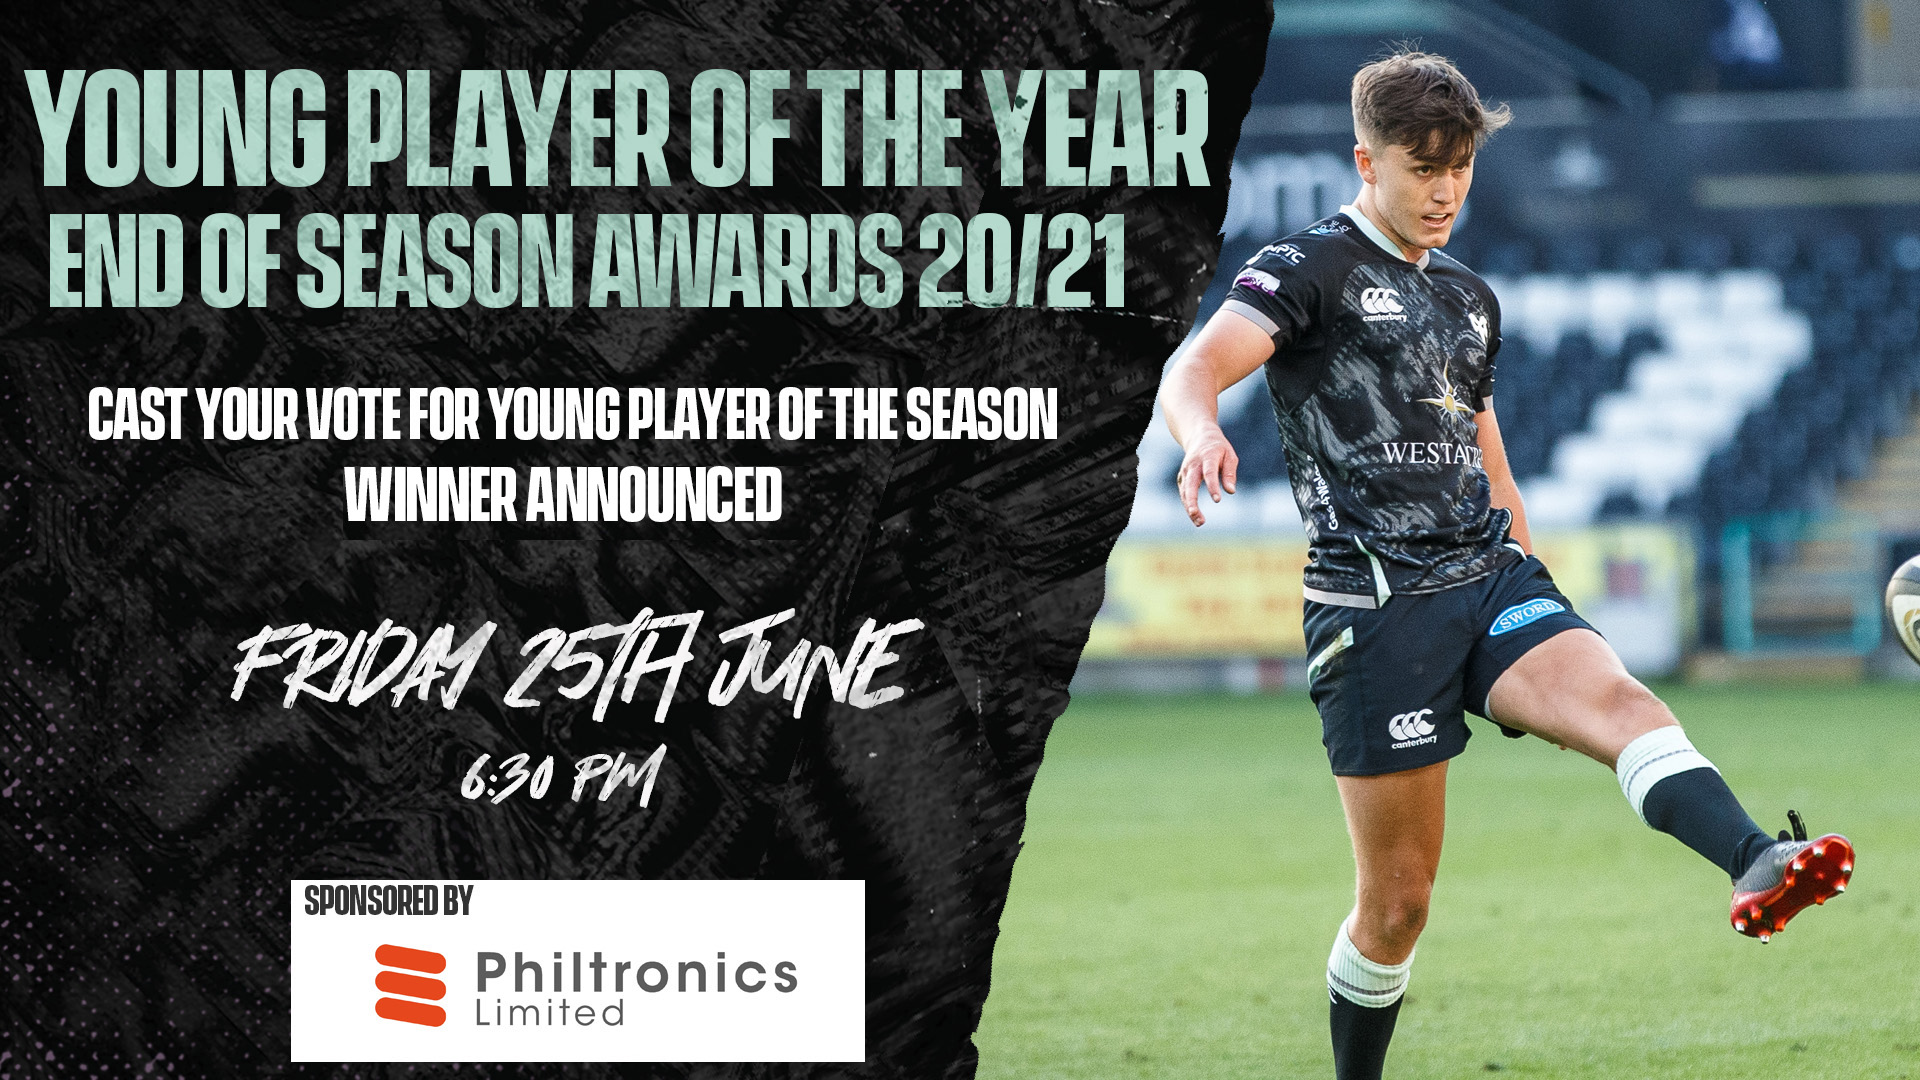 Young player of the year